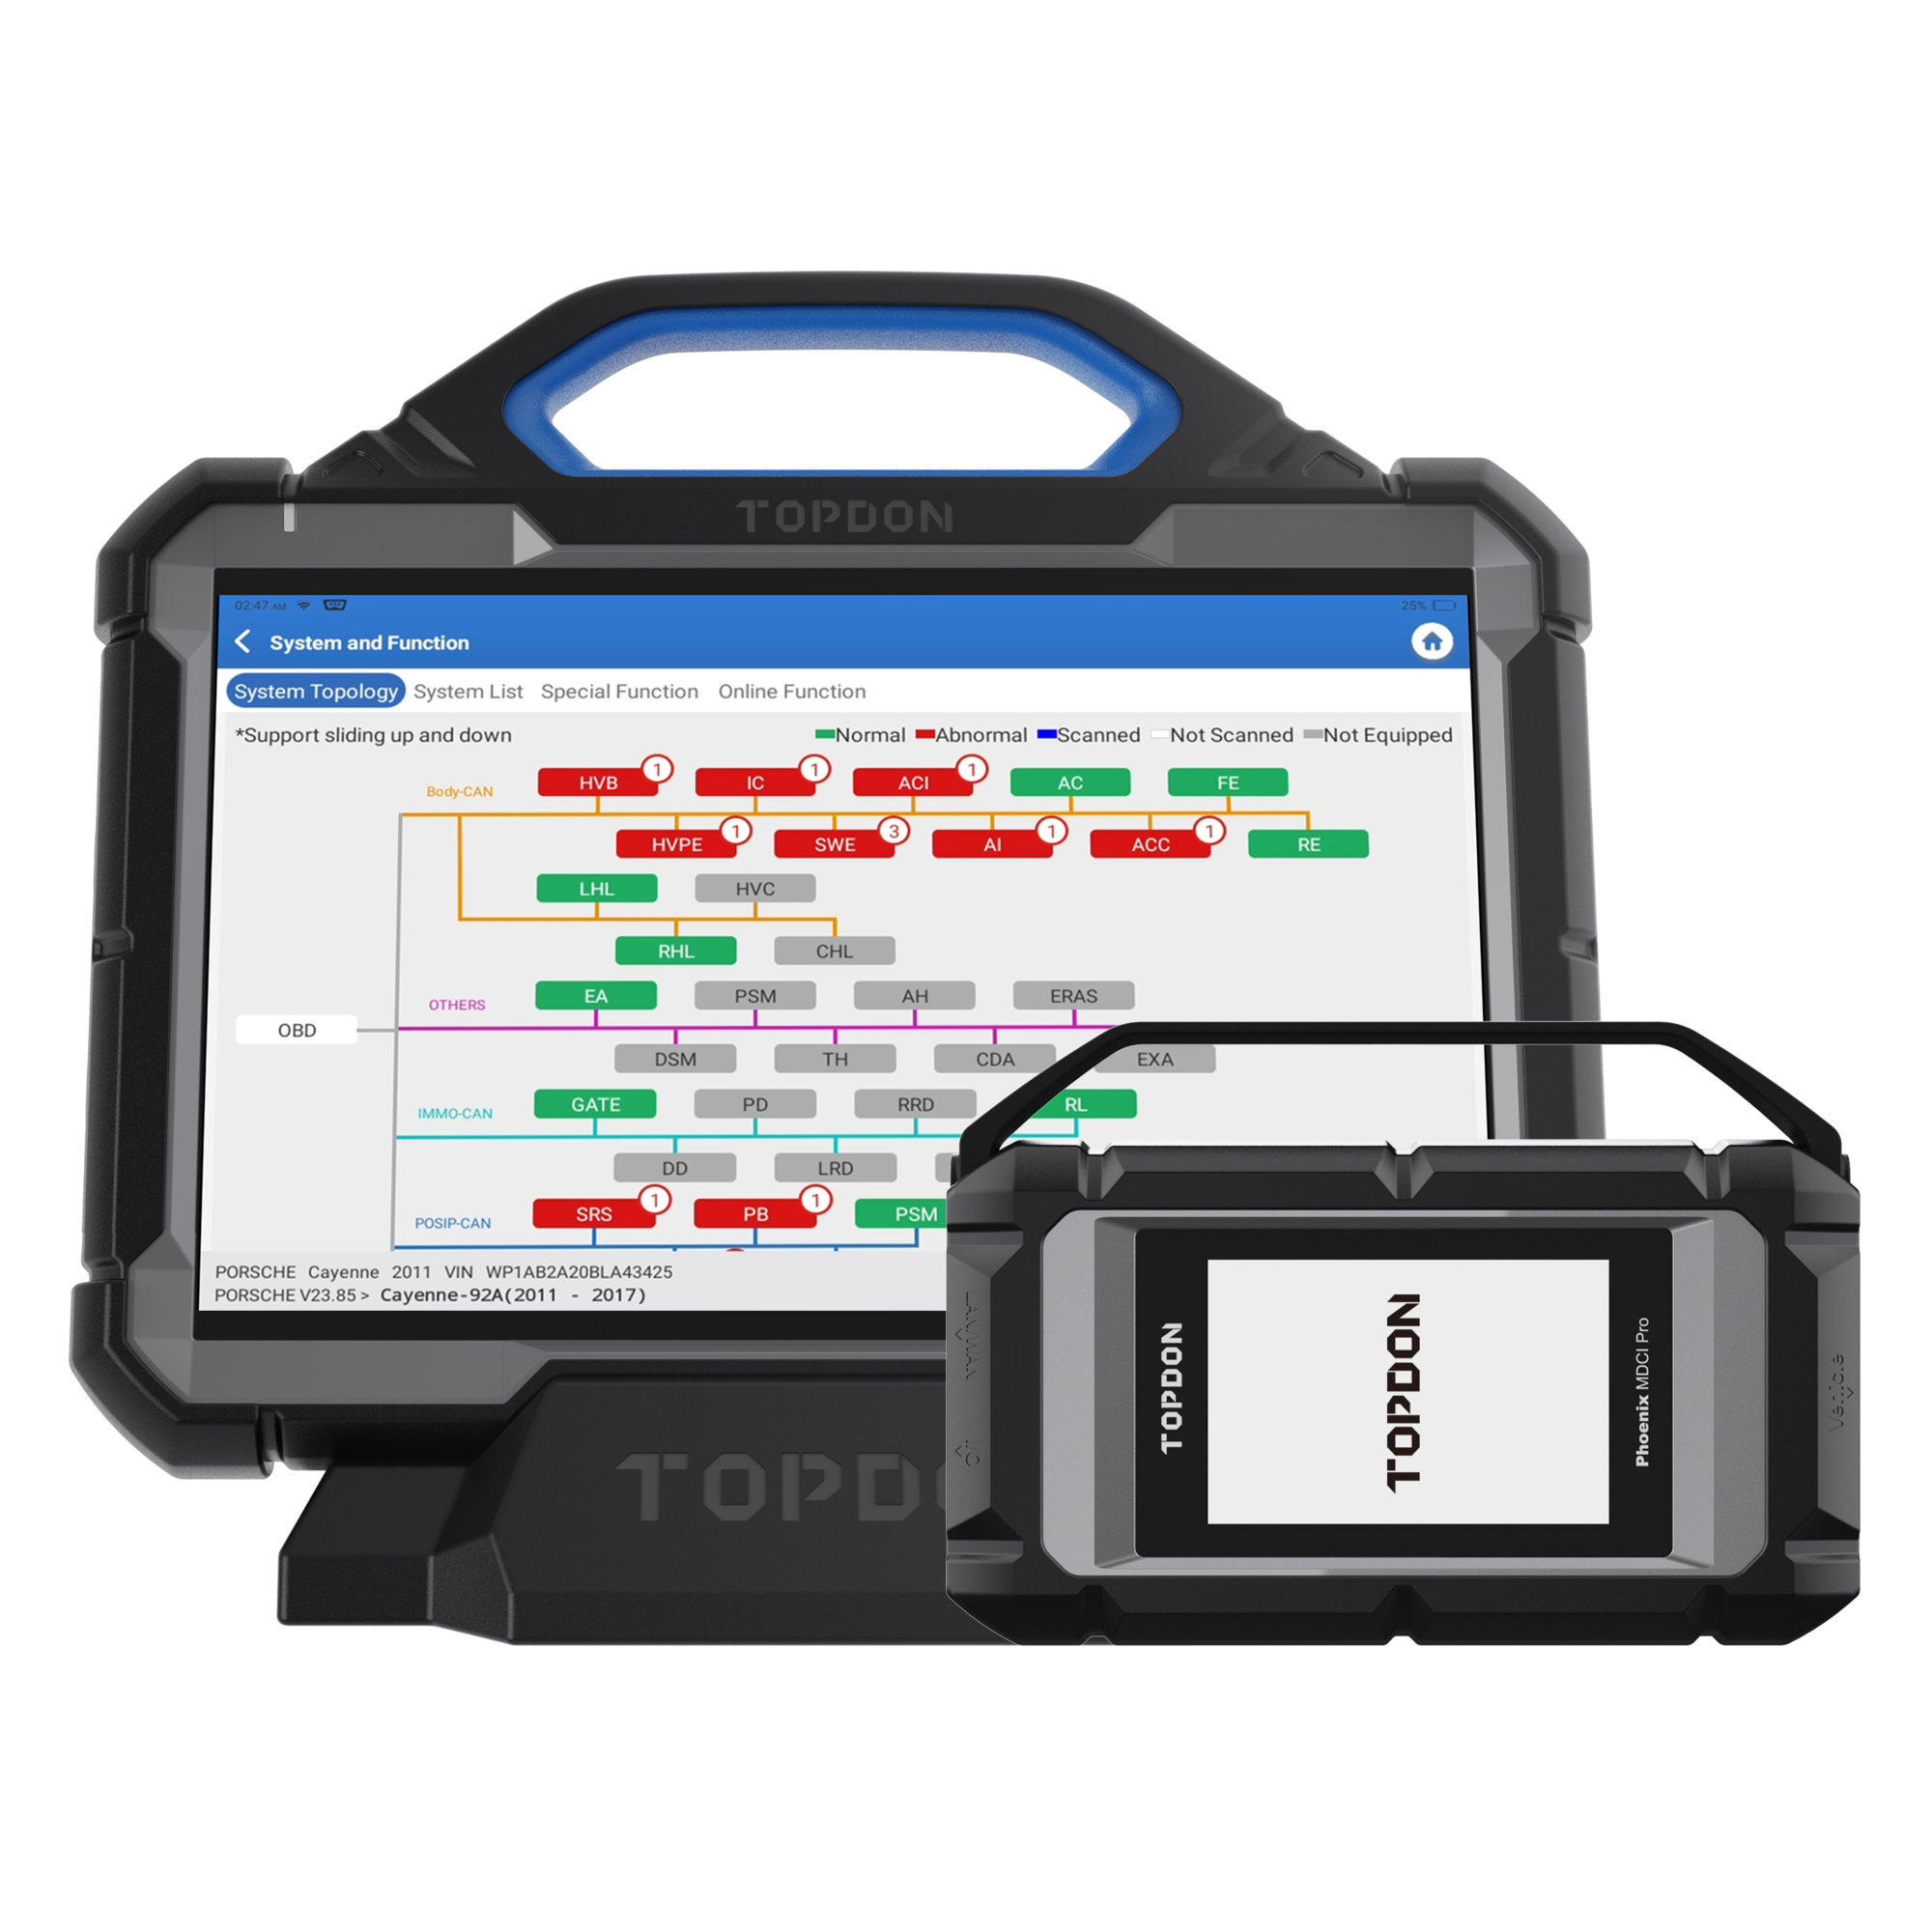 TOPDON, Diagnostic scanner with maximized capabilities., Model Phoenix Max Basic